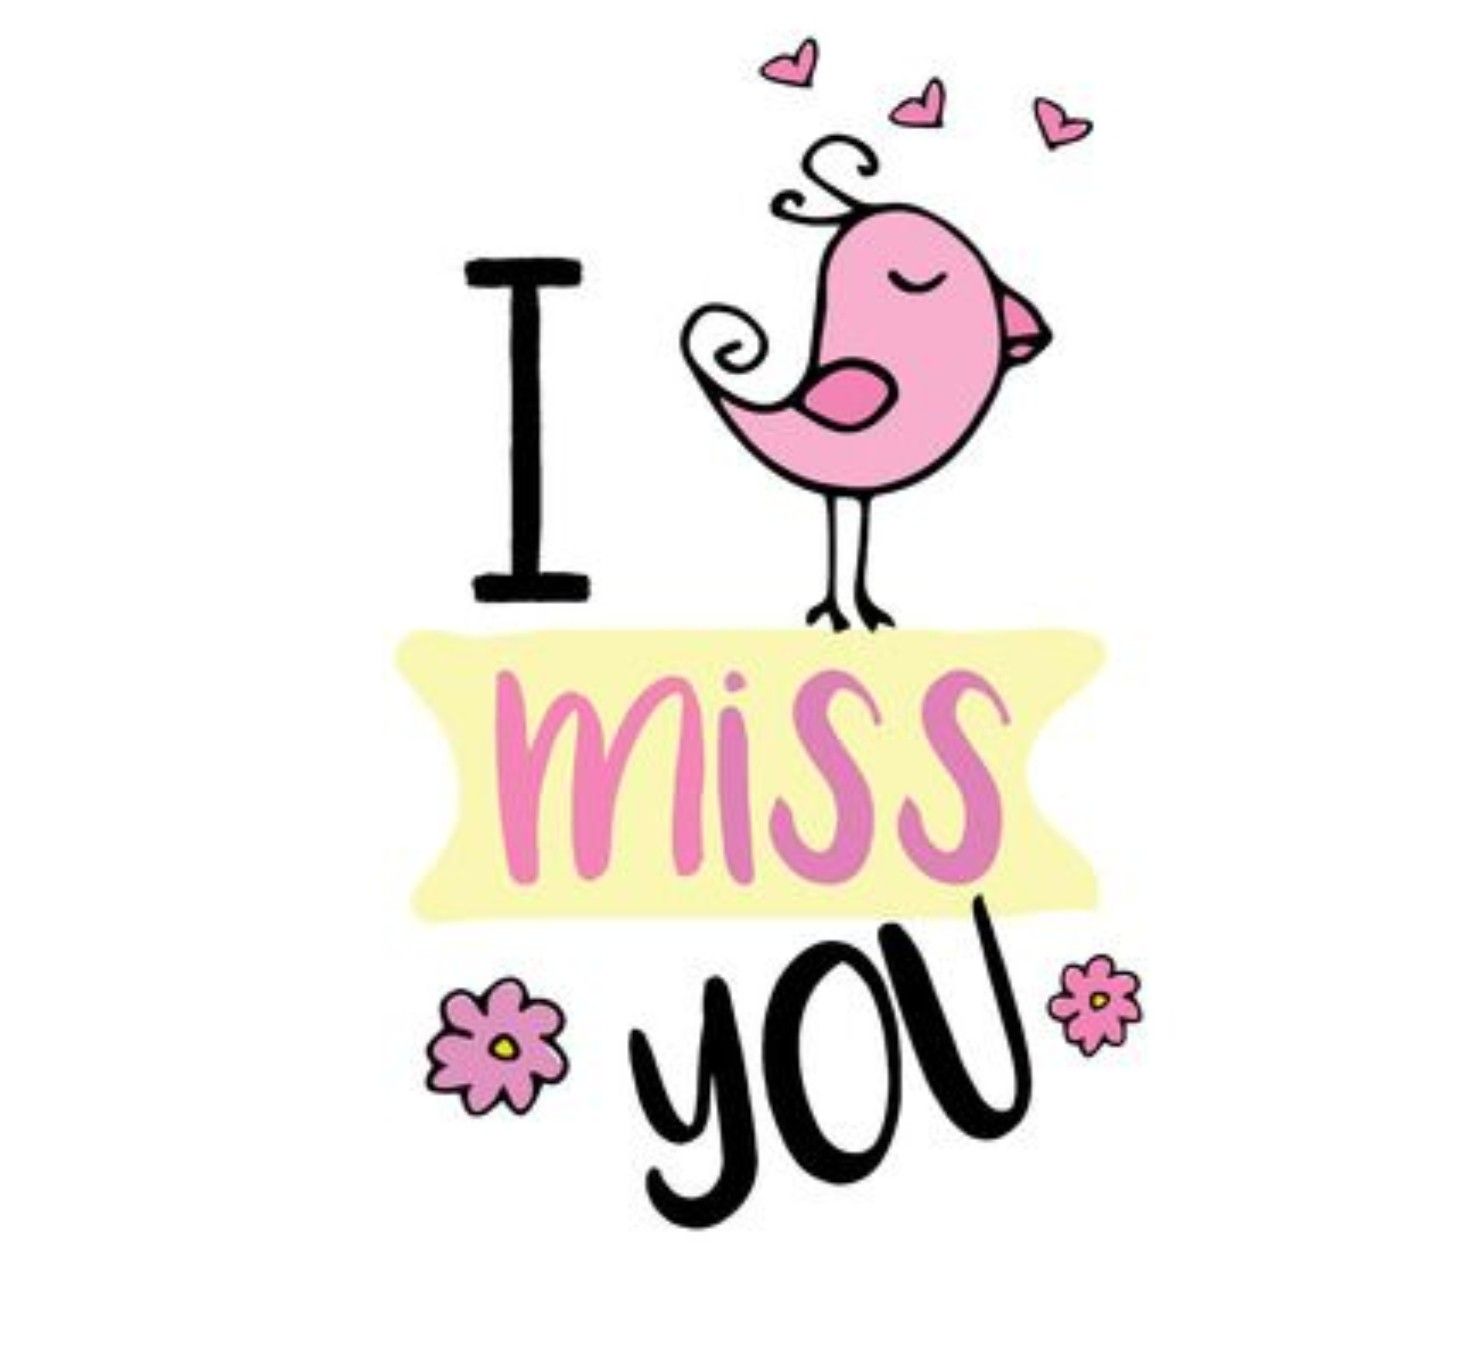 I Miss You poster